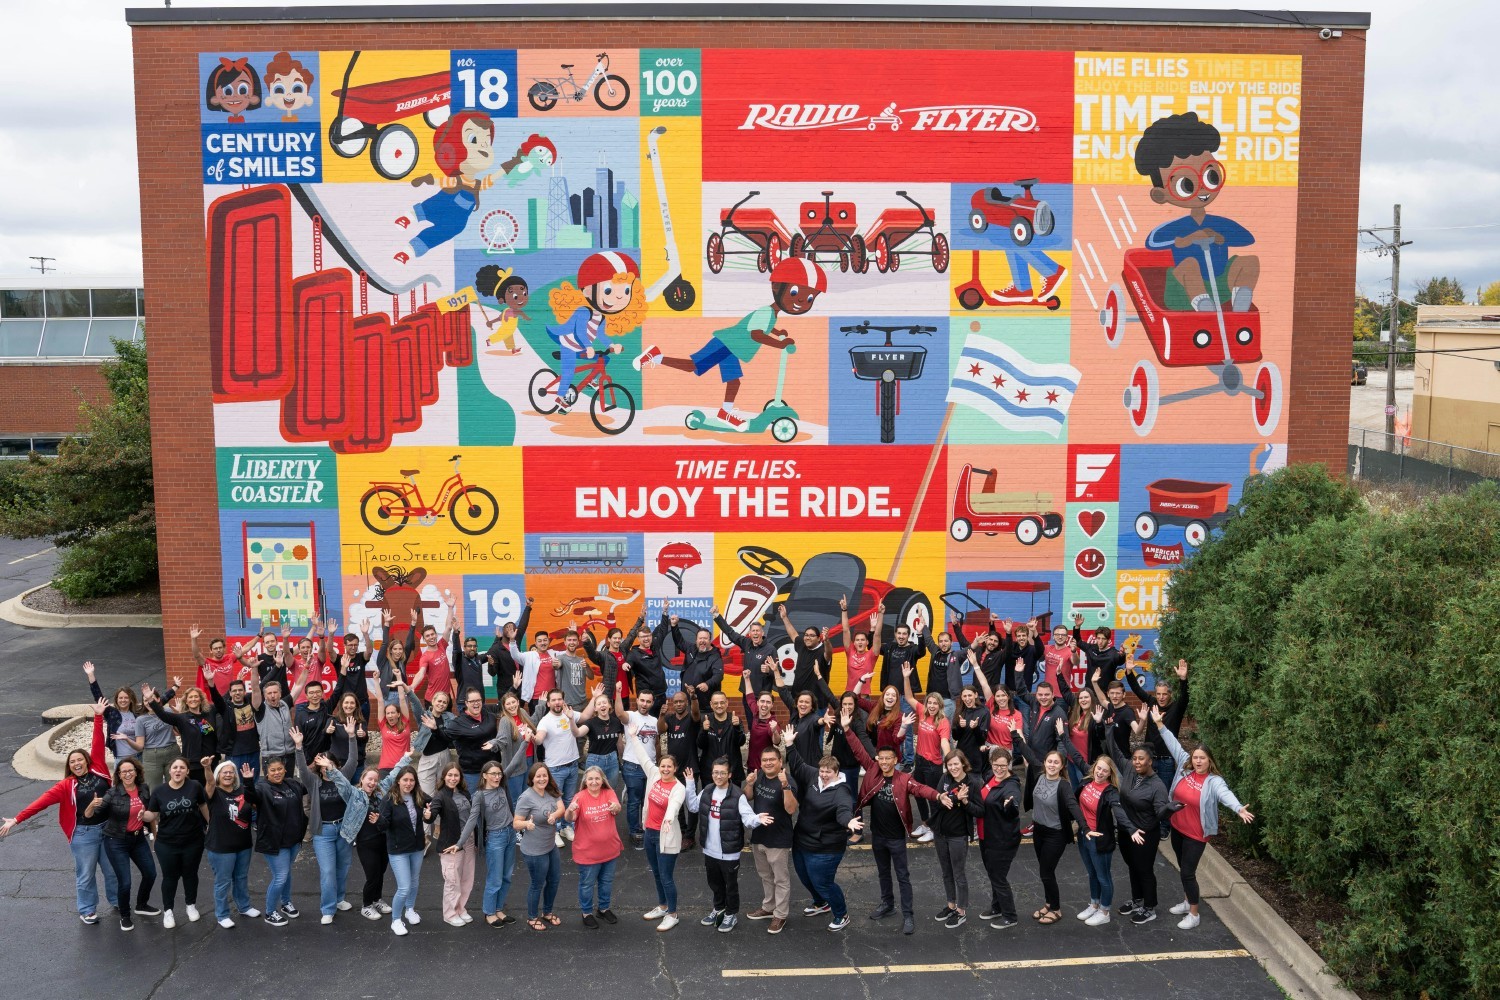 Designed by the team, a new mural on Radio Flyer’s building highlights a century of smiles and leaves a lasting legacy. 